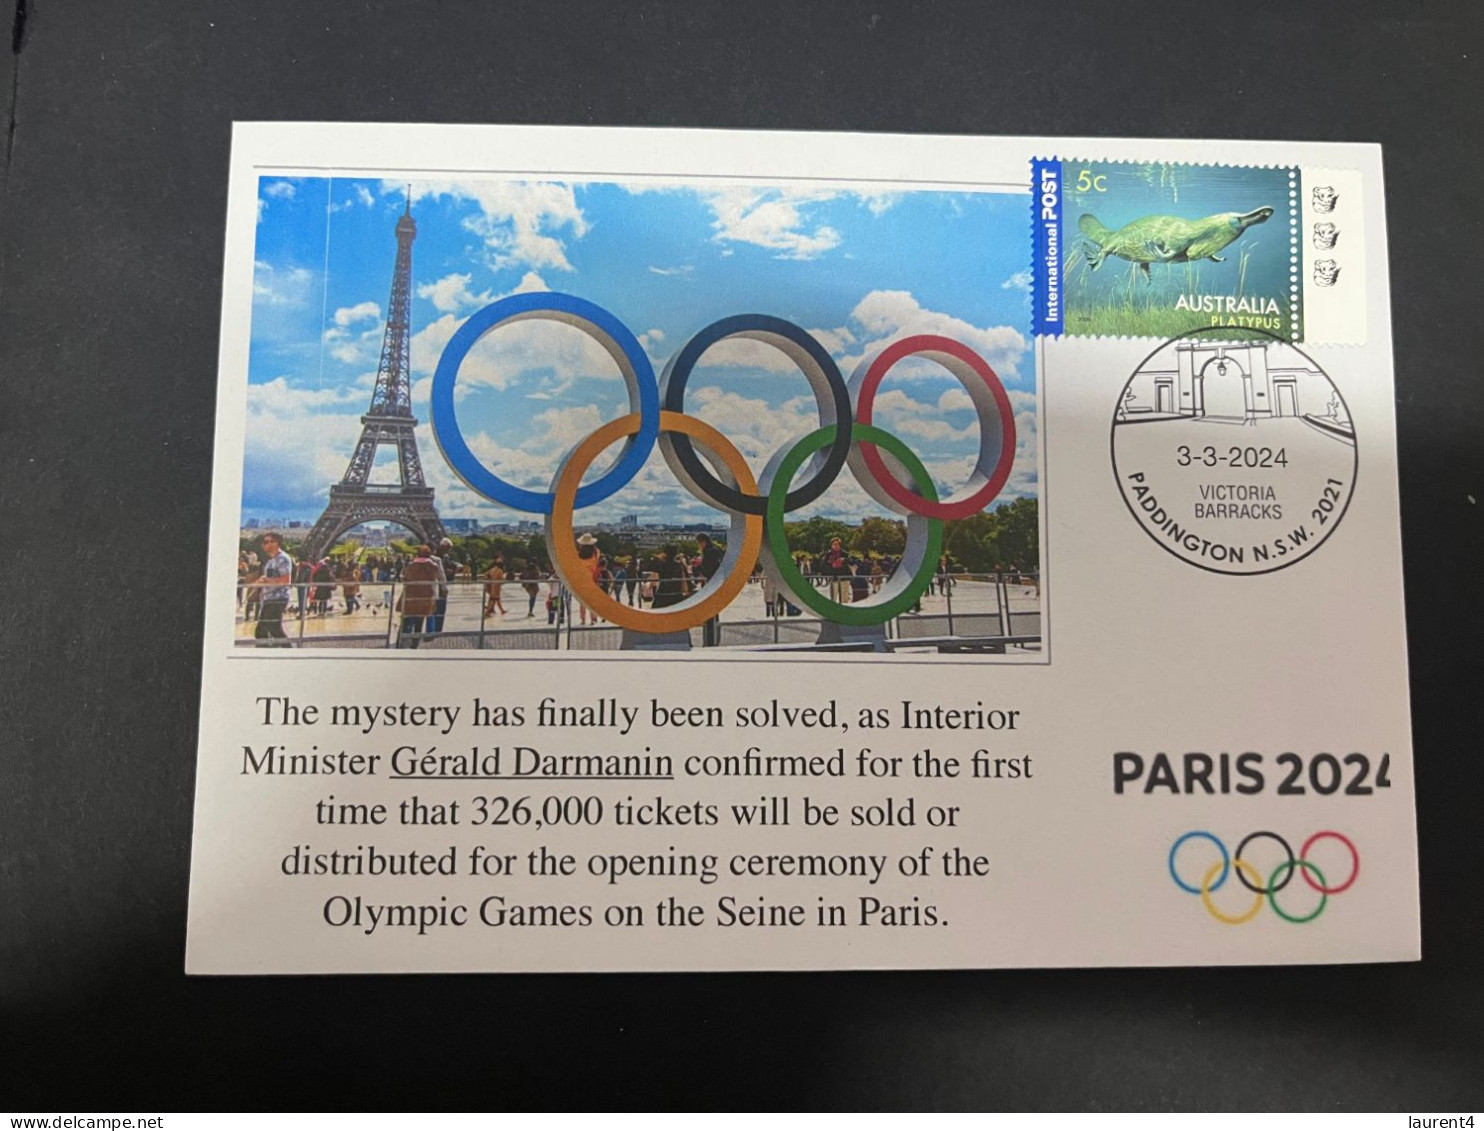 7-3-2024 (2 Y 22) Paris 2024 Summer Olympic - 326,000 Tickets Available To The Games Opening Ceremony On Seine River - Verano 2024 : París